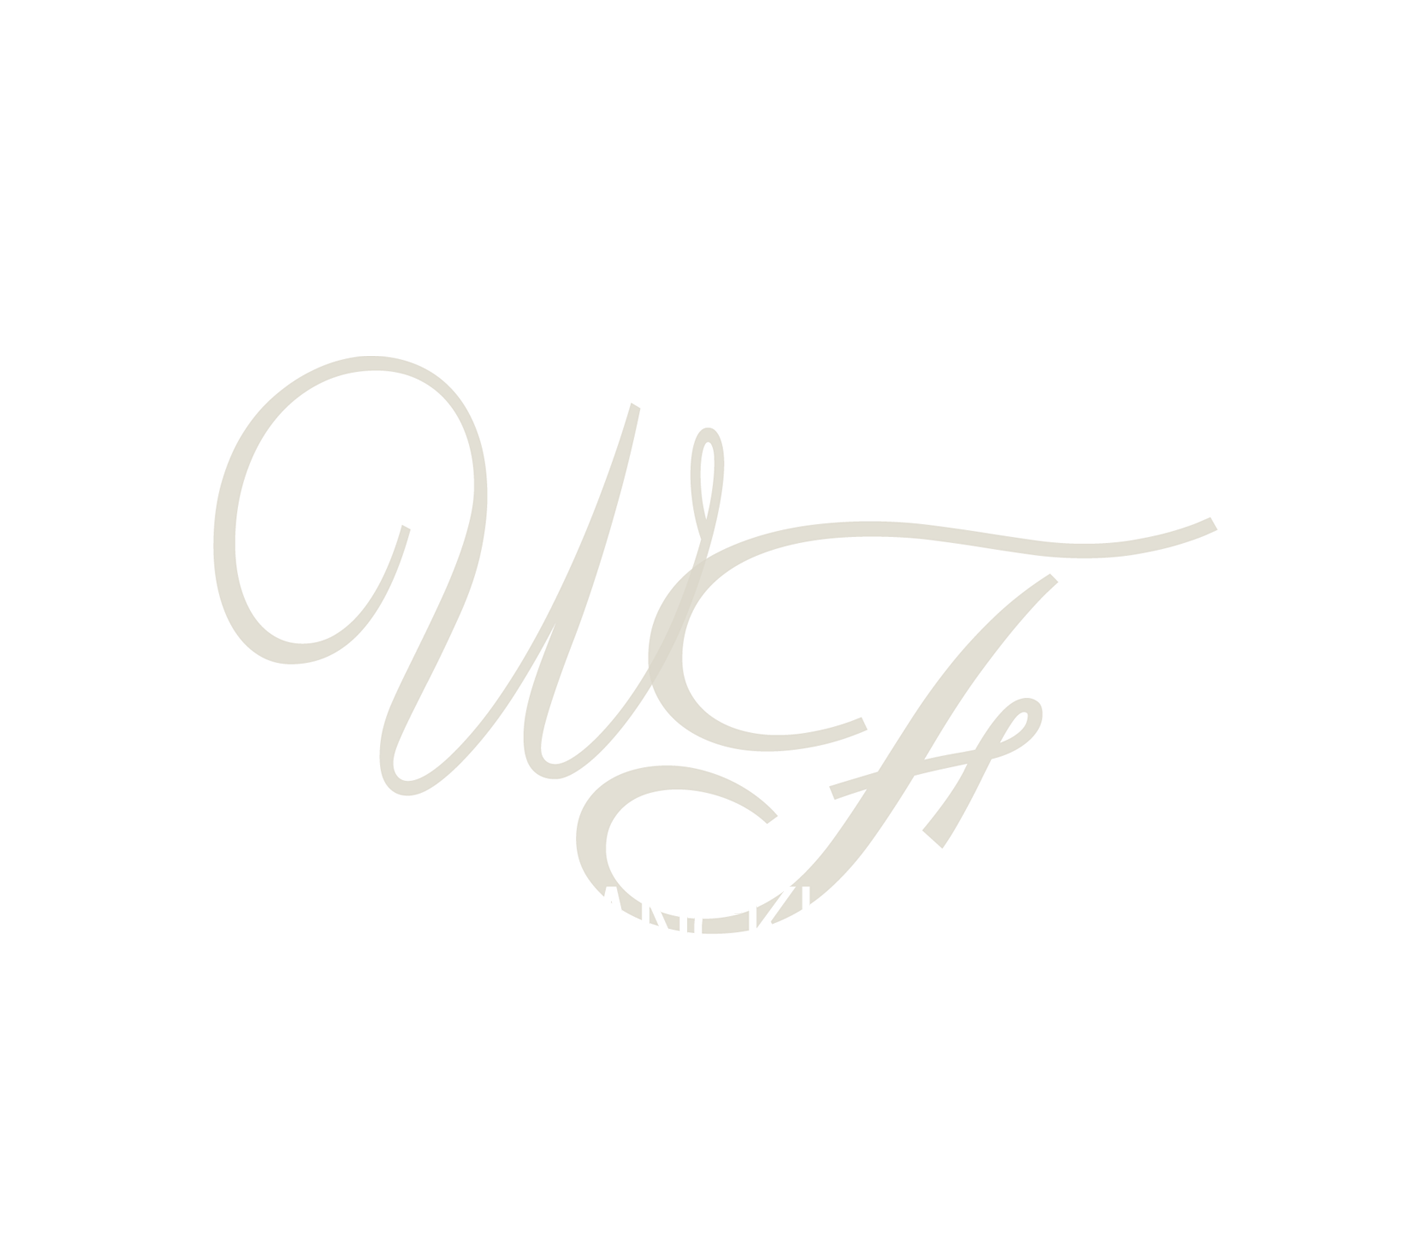 Refresh by William Franckle, MD, FACS Aesthetic Plastic Surgery in Voorhees, NJ